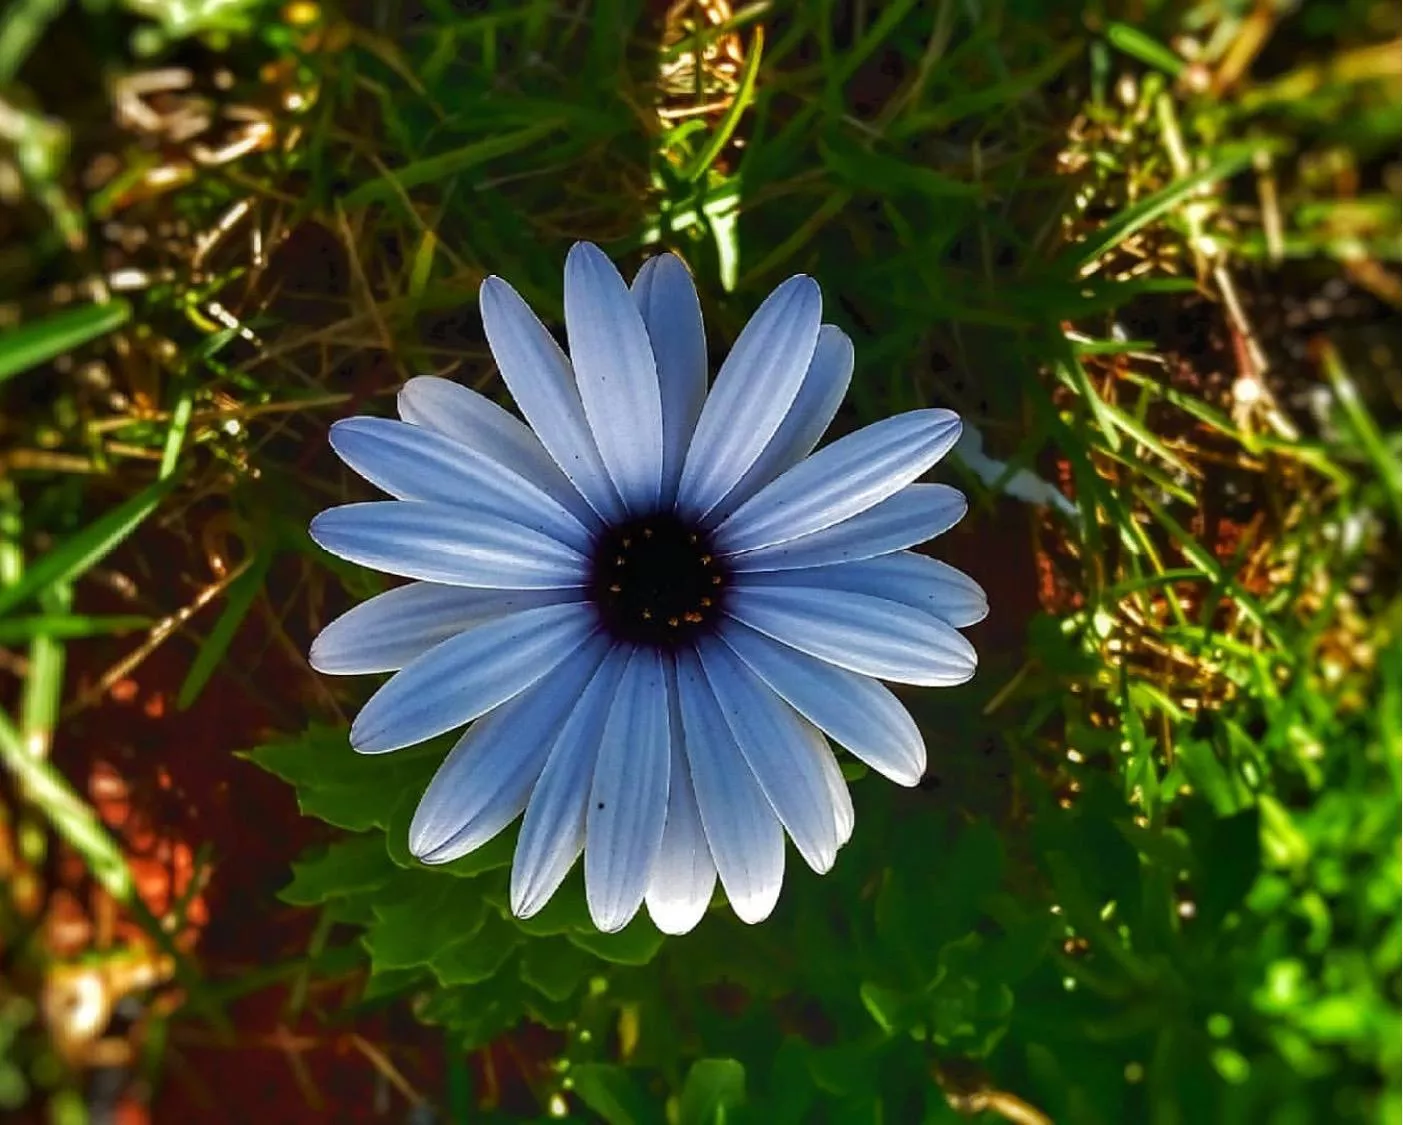 Viewed from above and in shadows, a single white daisy flower with a black center grown from a patch of grass.